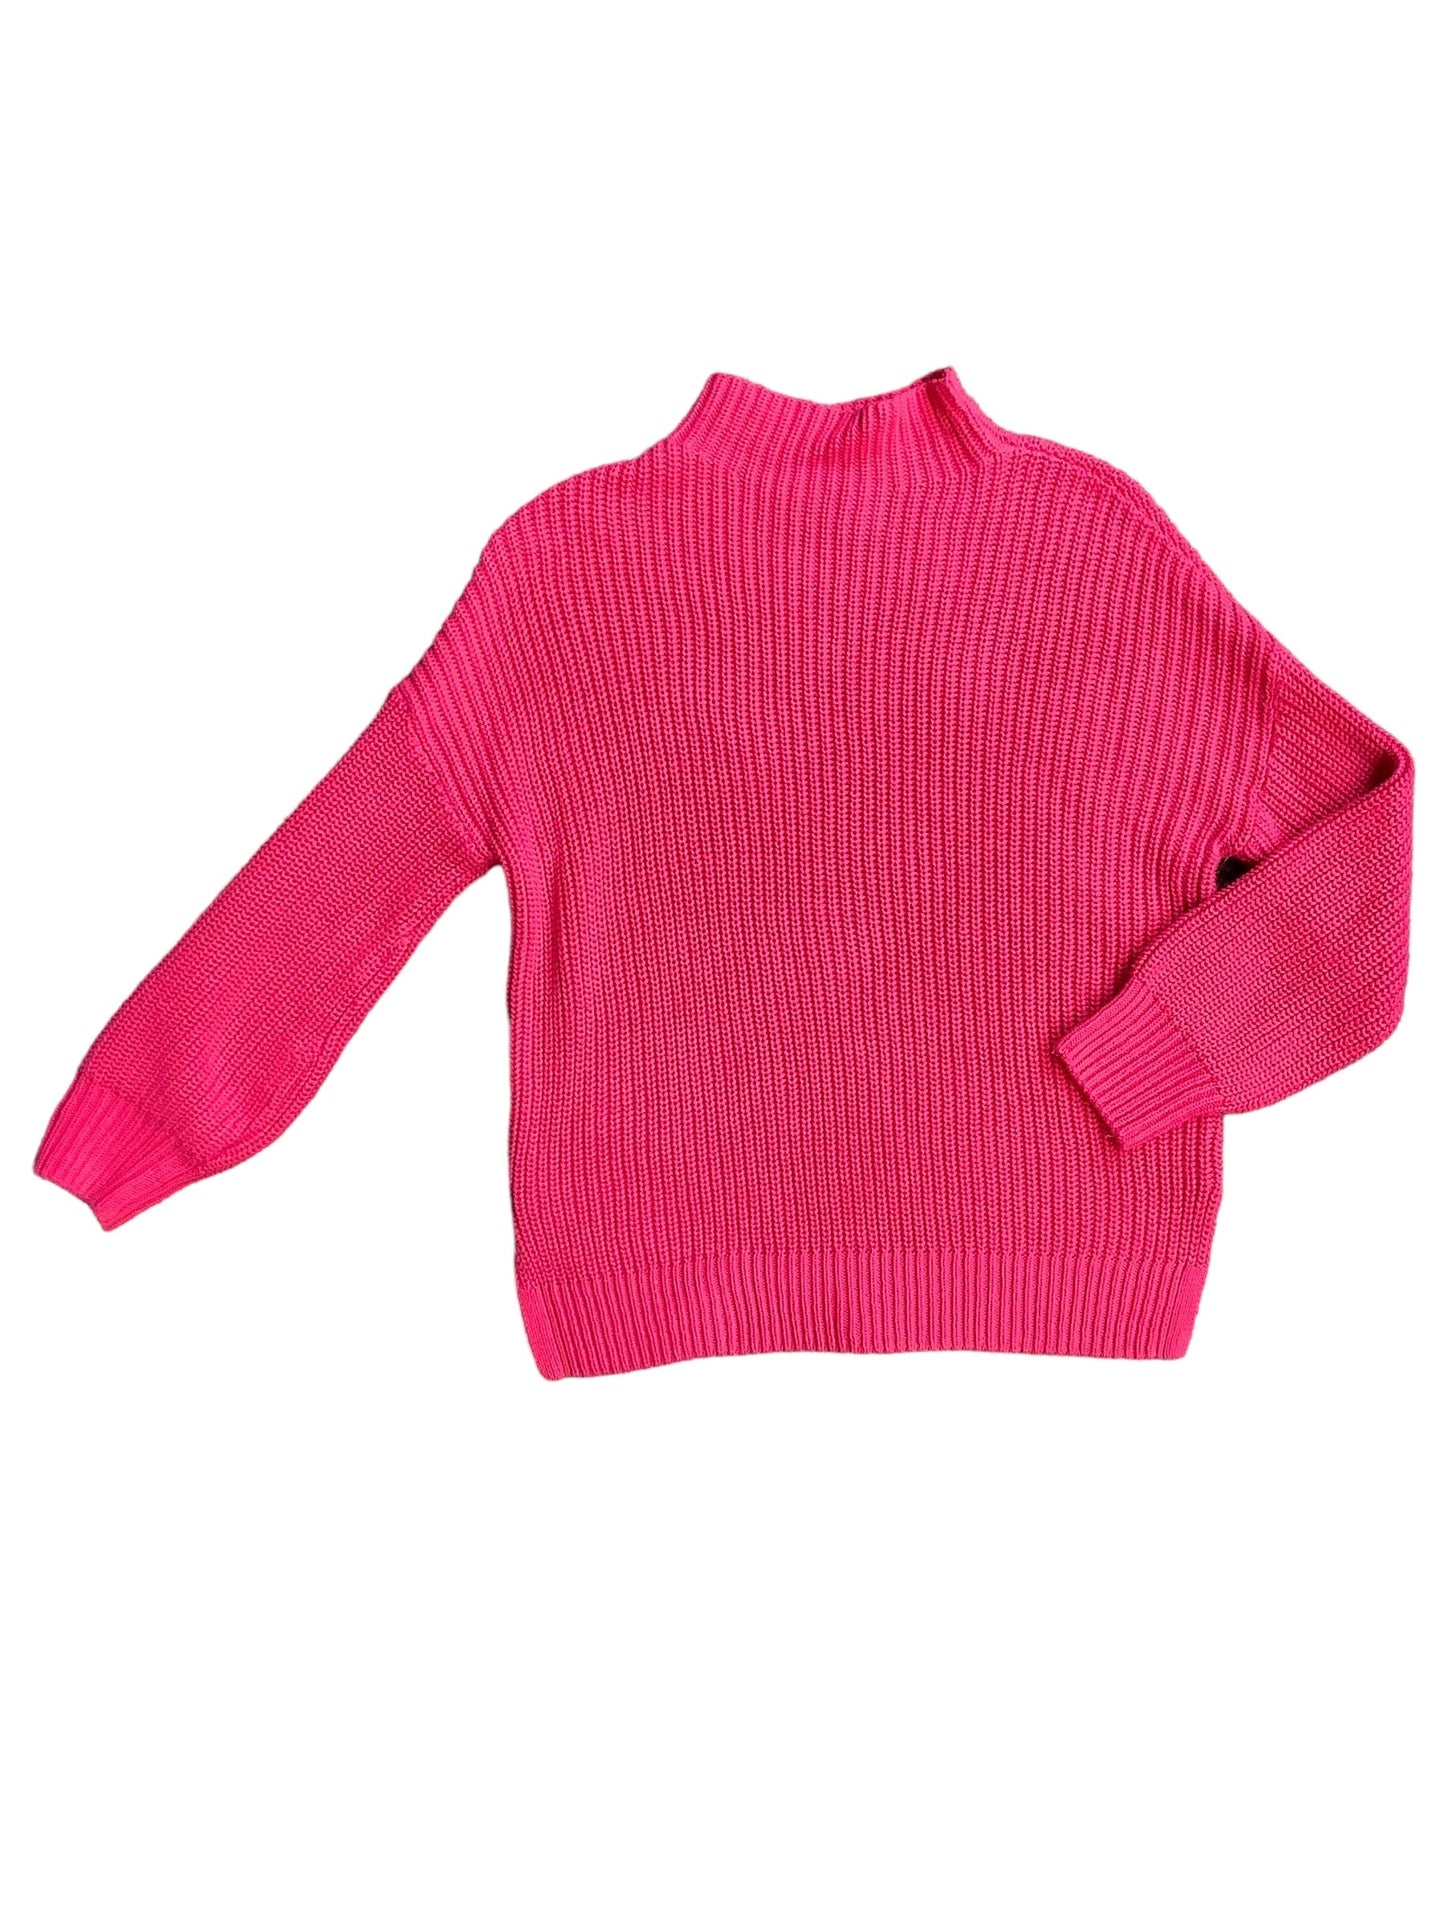 Hot Pink Sweater Cupcakes And Cashmere, Size Xs